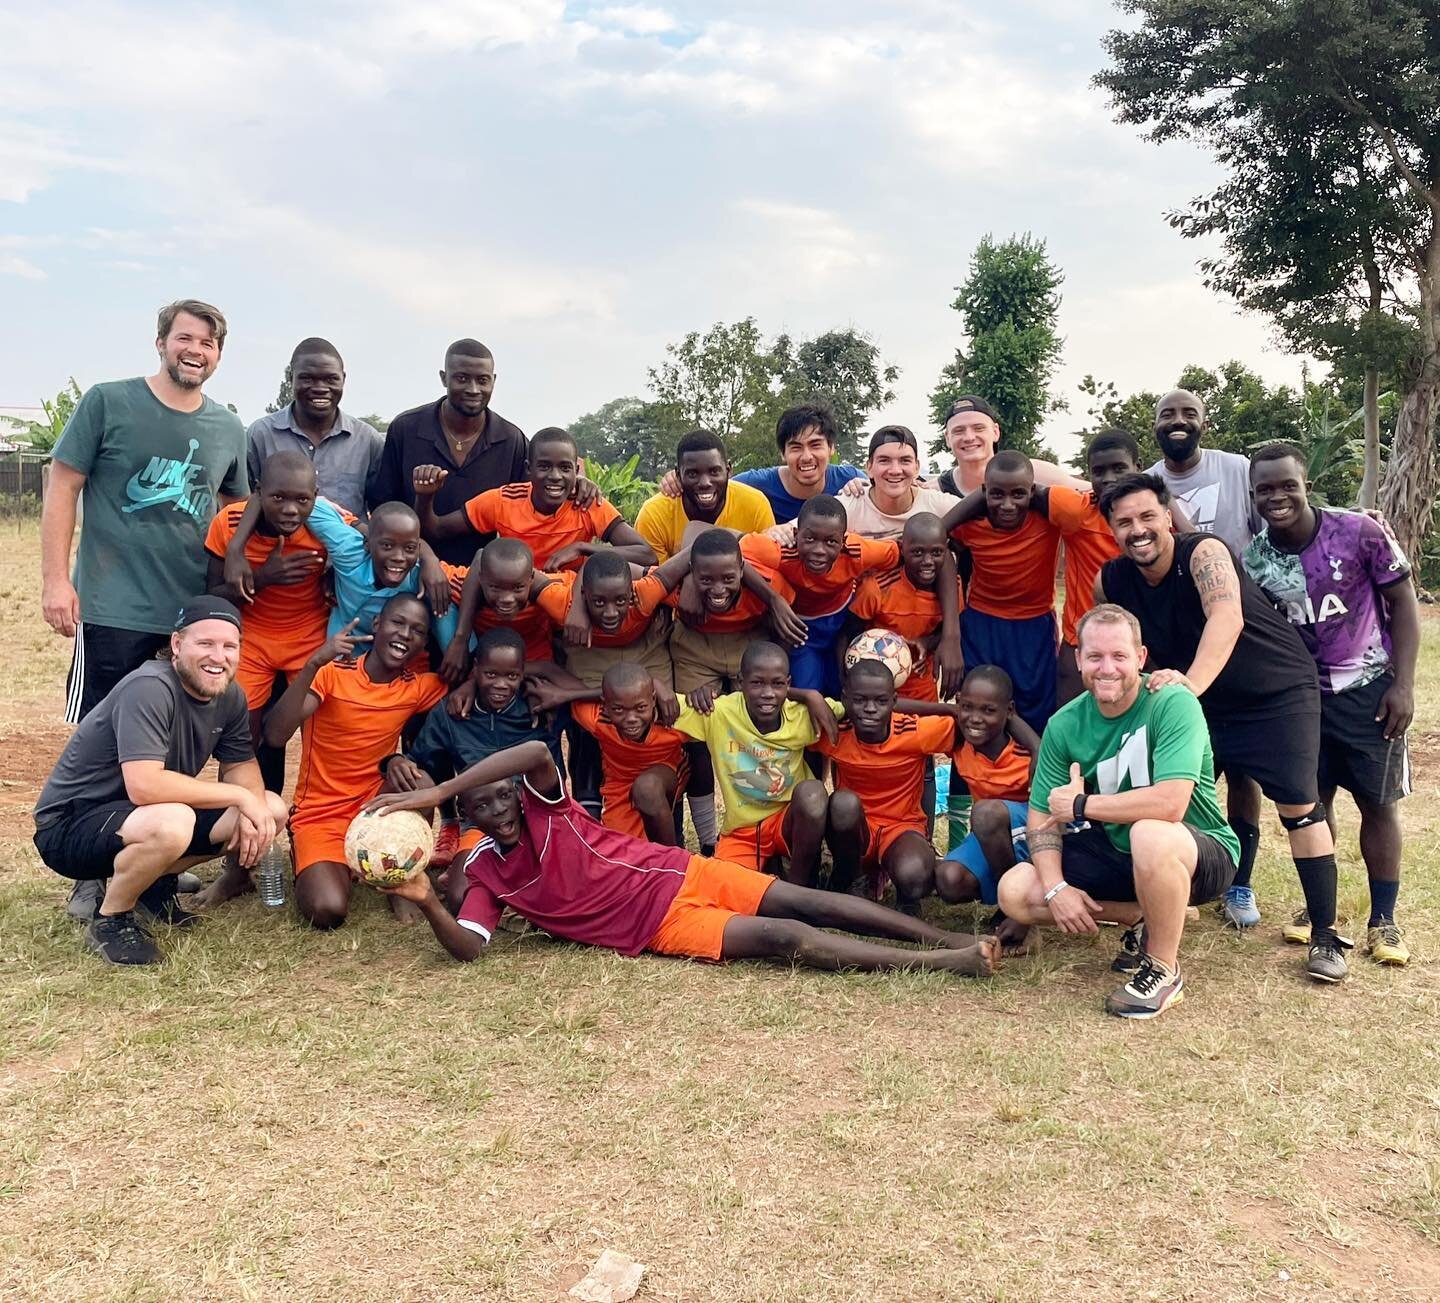 Futbol time! ⚽️

Our team of interns and facilitators have played soccer various times at schools and even at a Ugandan prison. Our team has played this team (our neighbors from St. Johns) on a couple of occasions. Today we treated their team to a tr